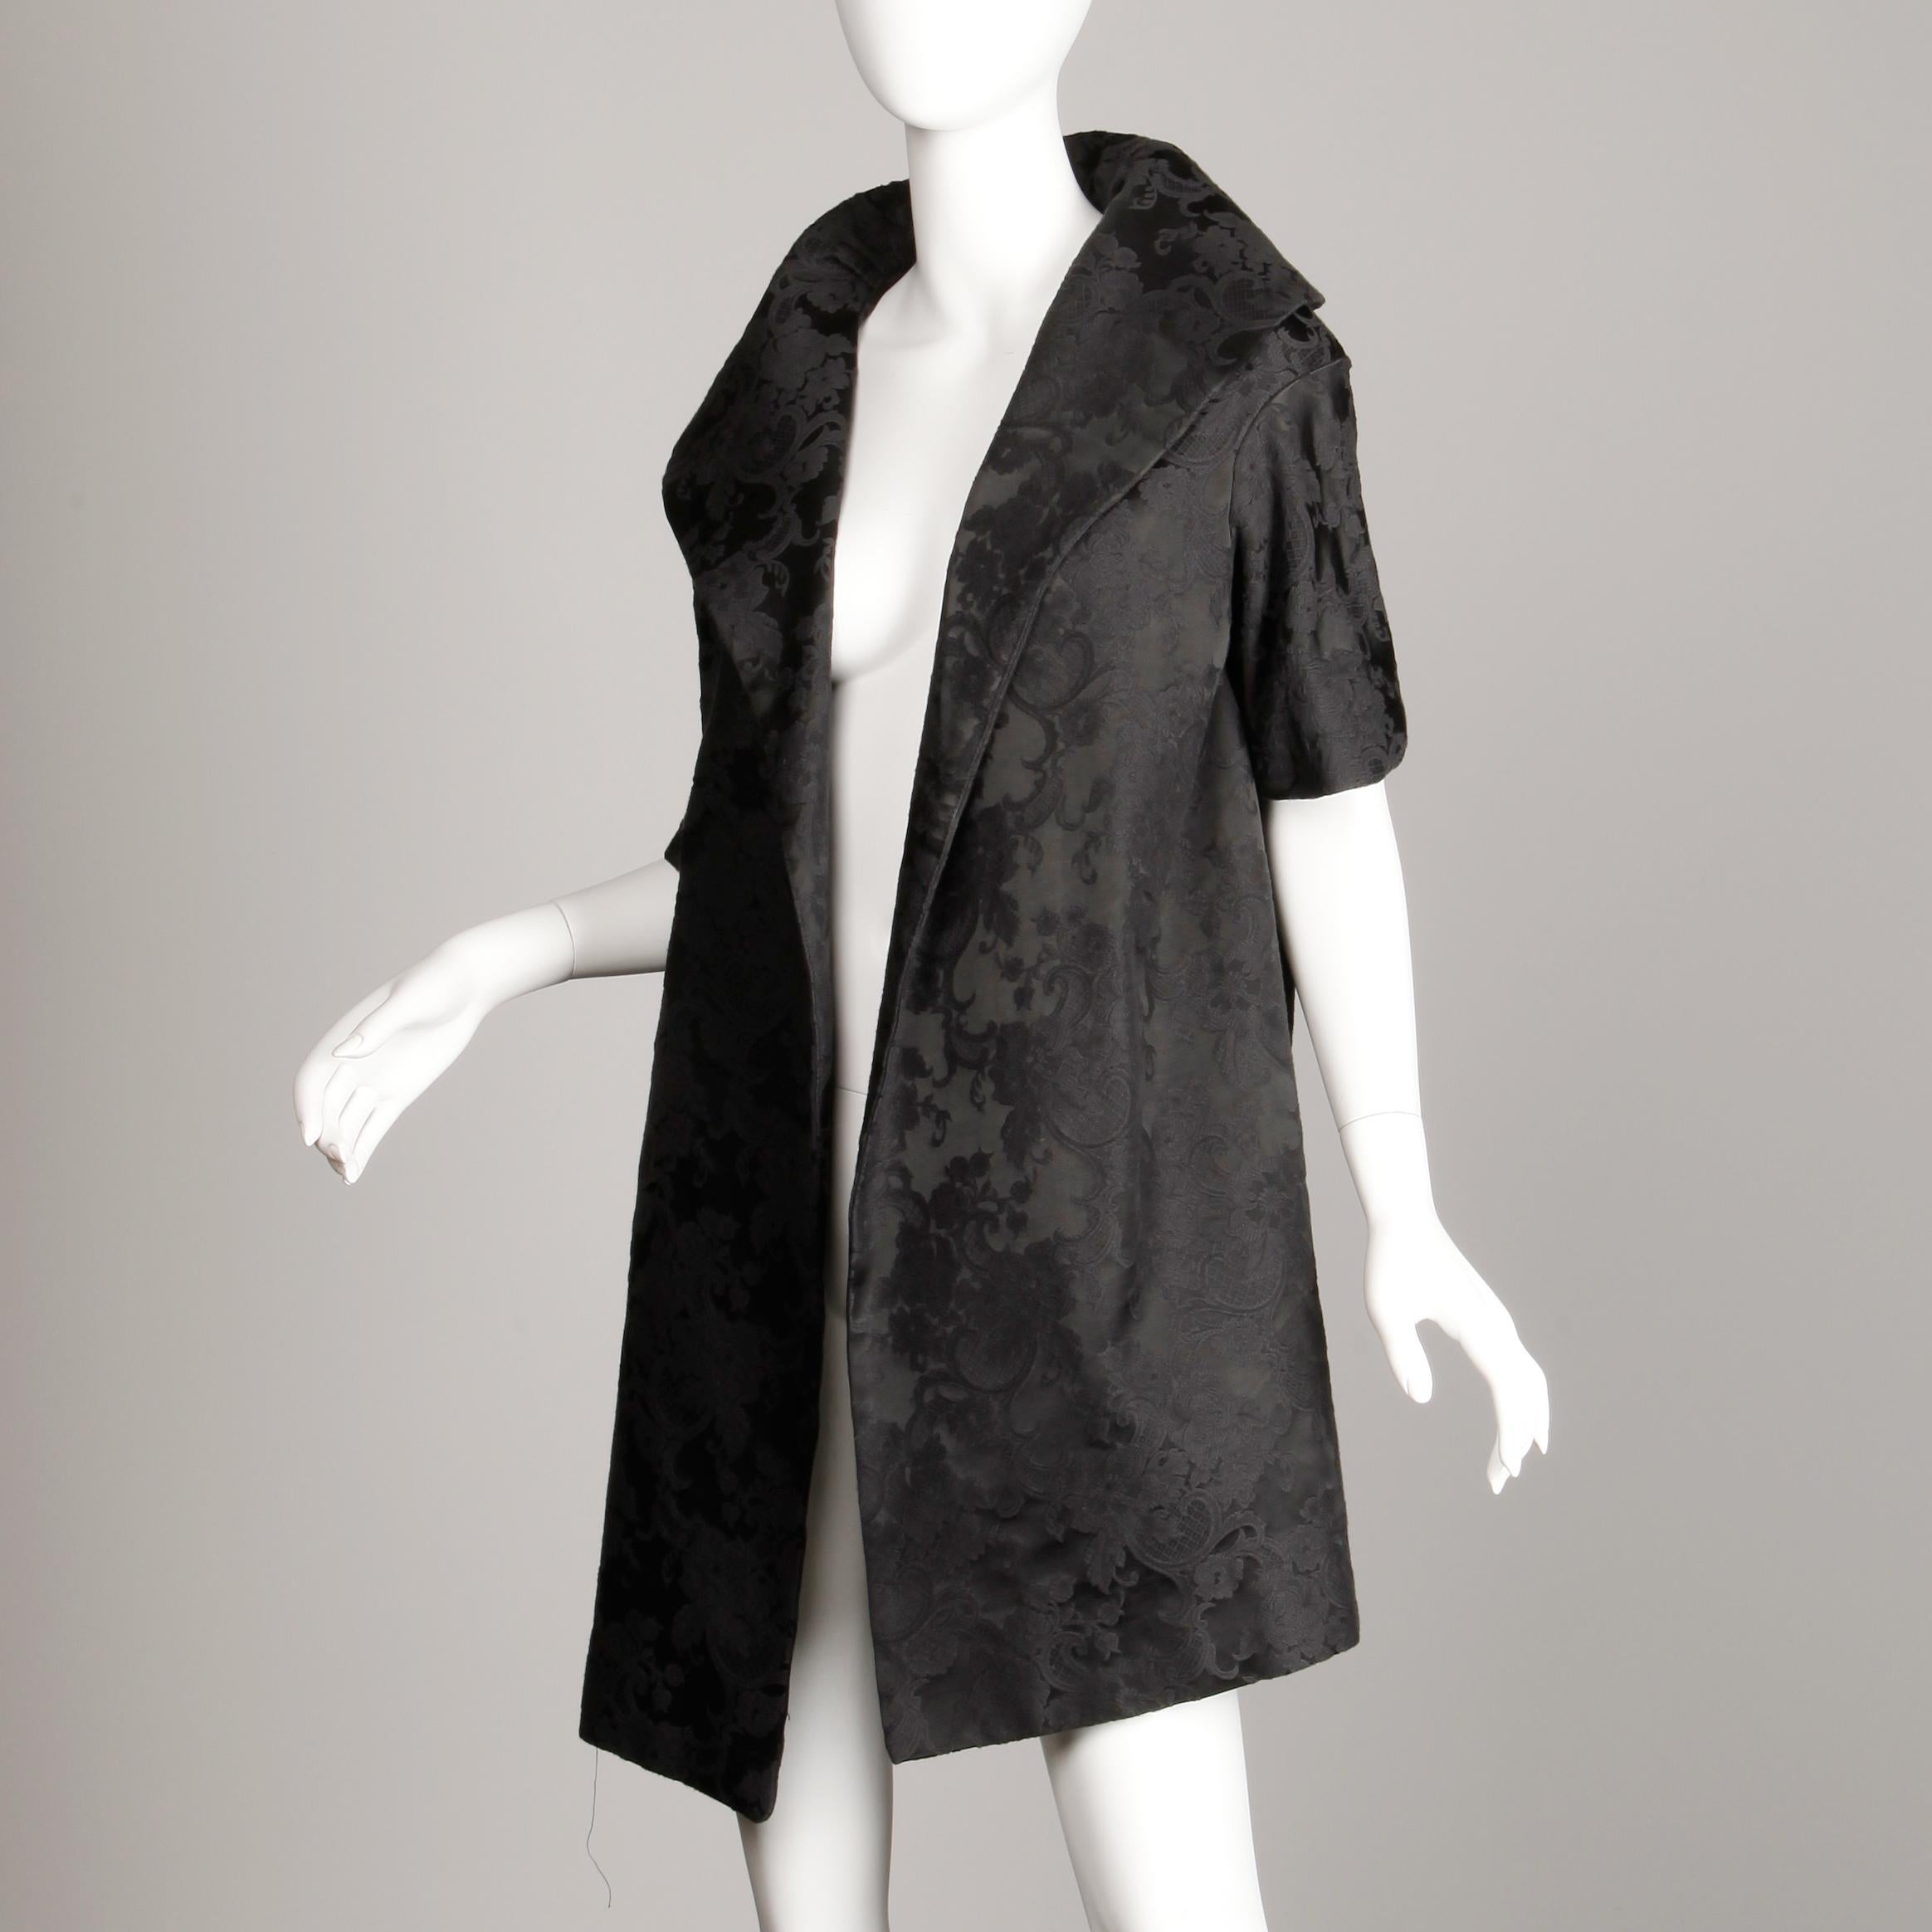 Women's 1960s Vintage Black Damask Evening Opera/ Dress Coat or Duster with 3/4 Sleeves